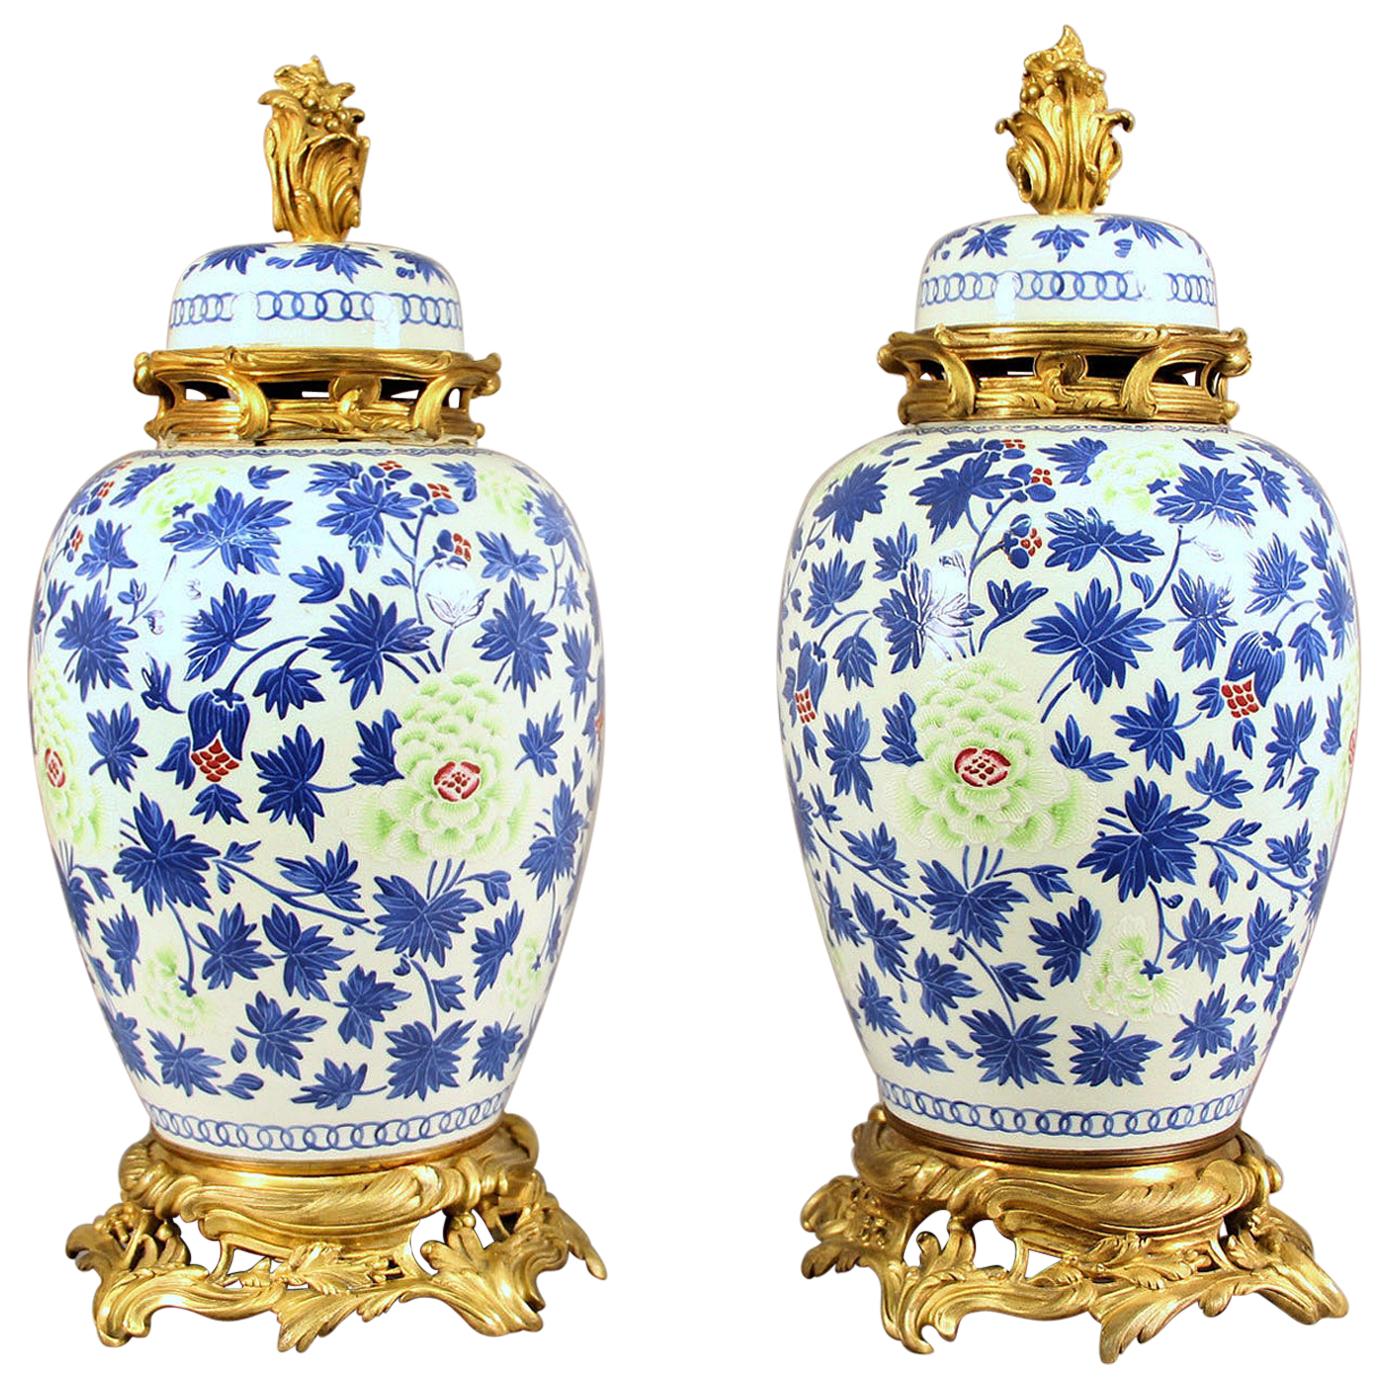 Pair of Late 19th Century Gilt Bronze Mounted Porcelain Vases in Chinese Style